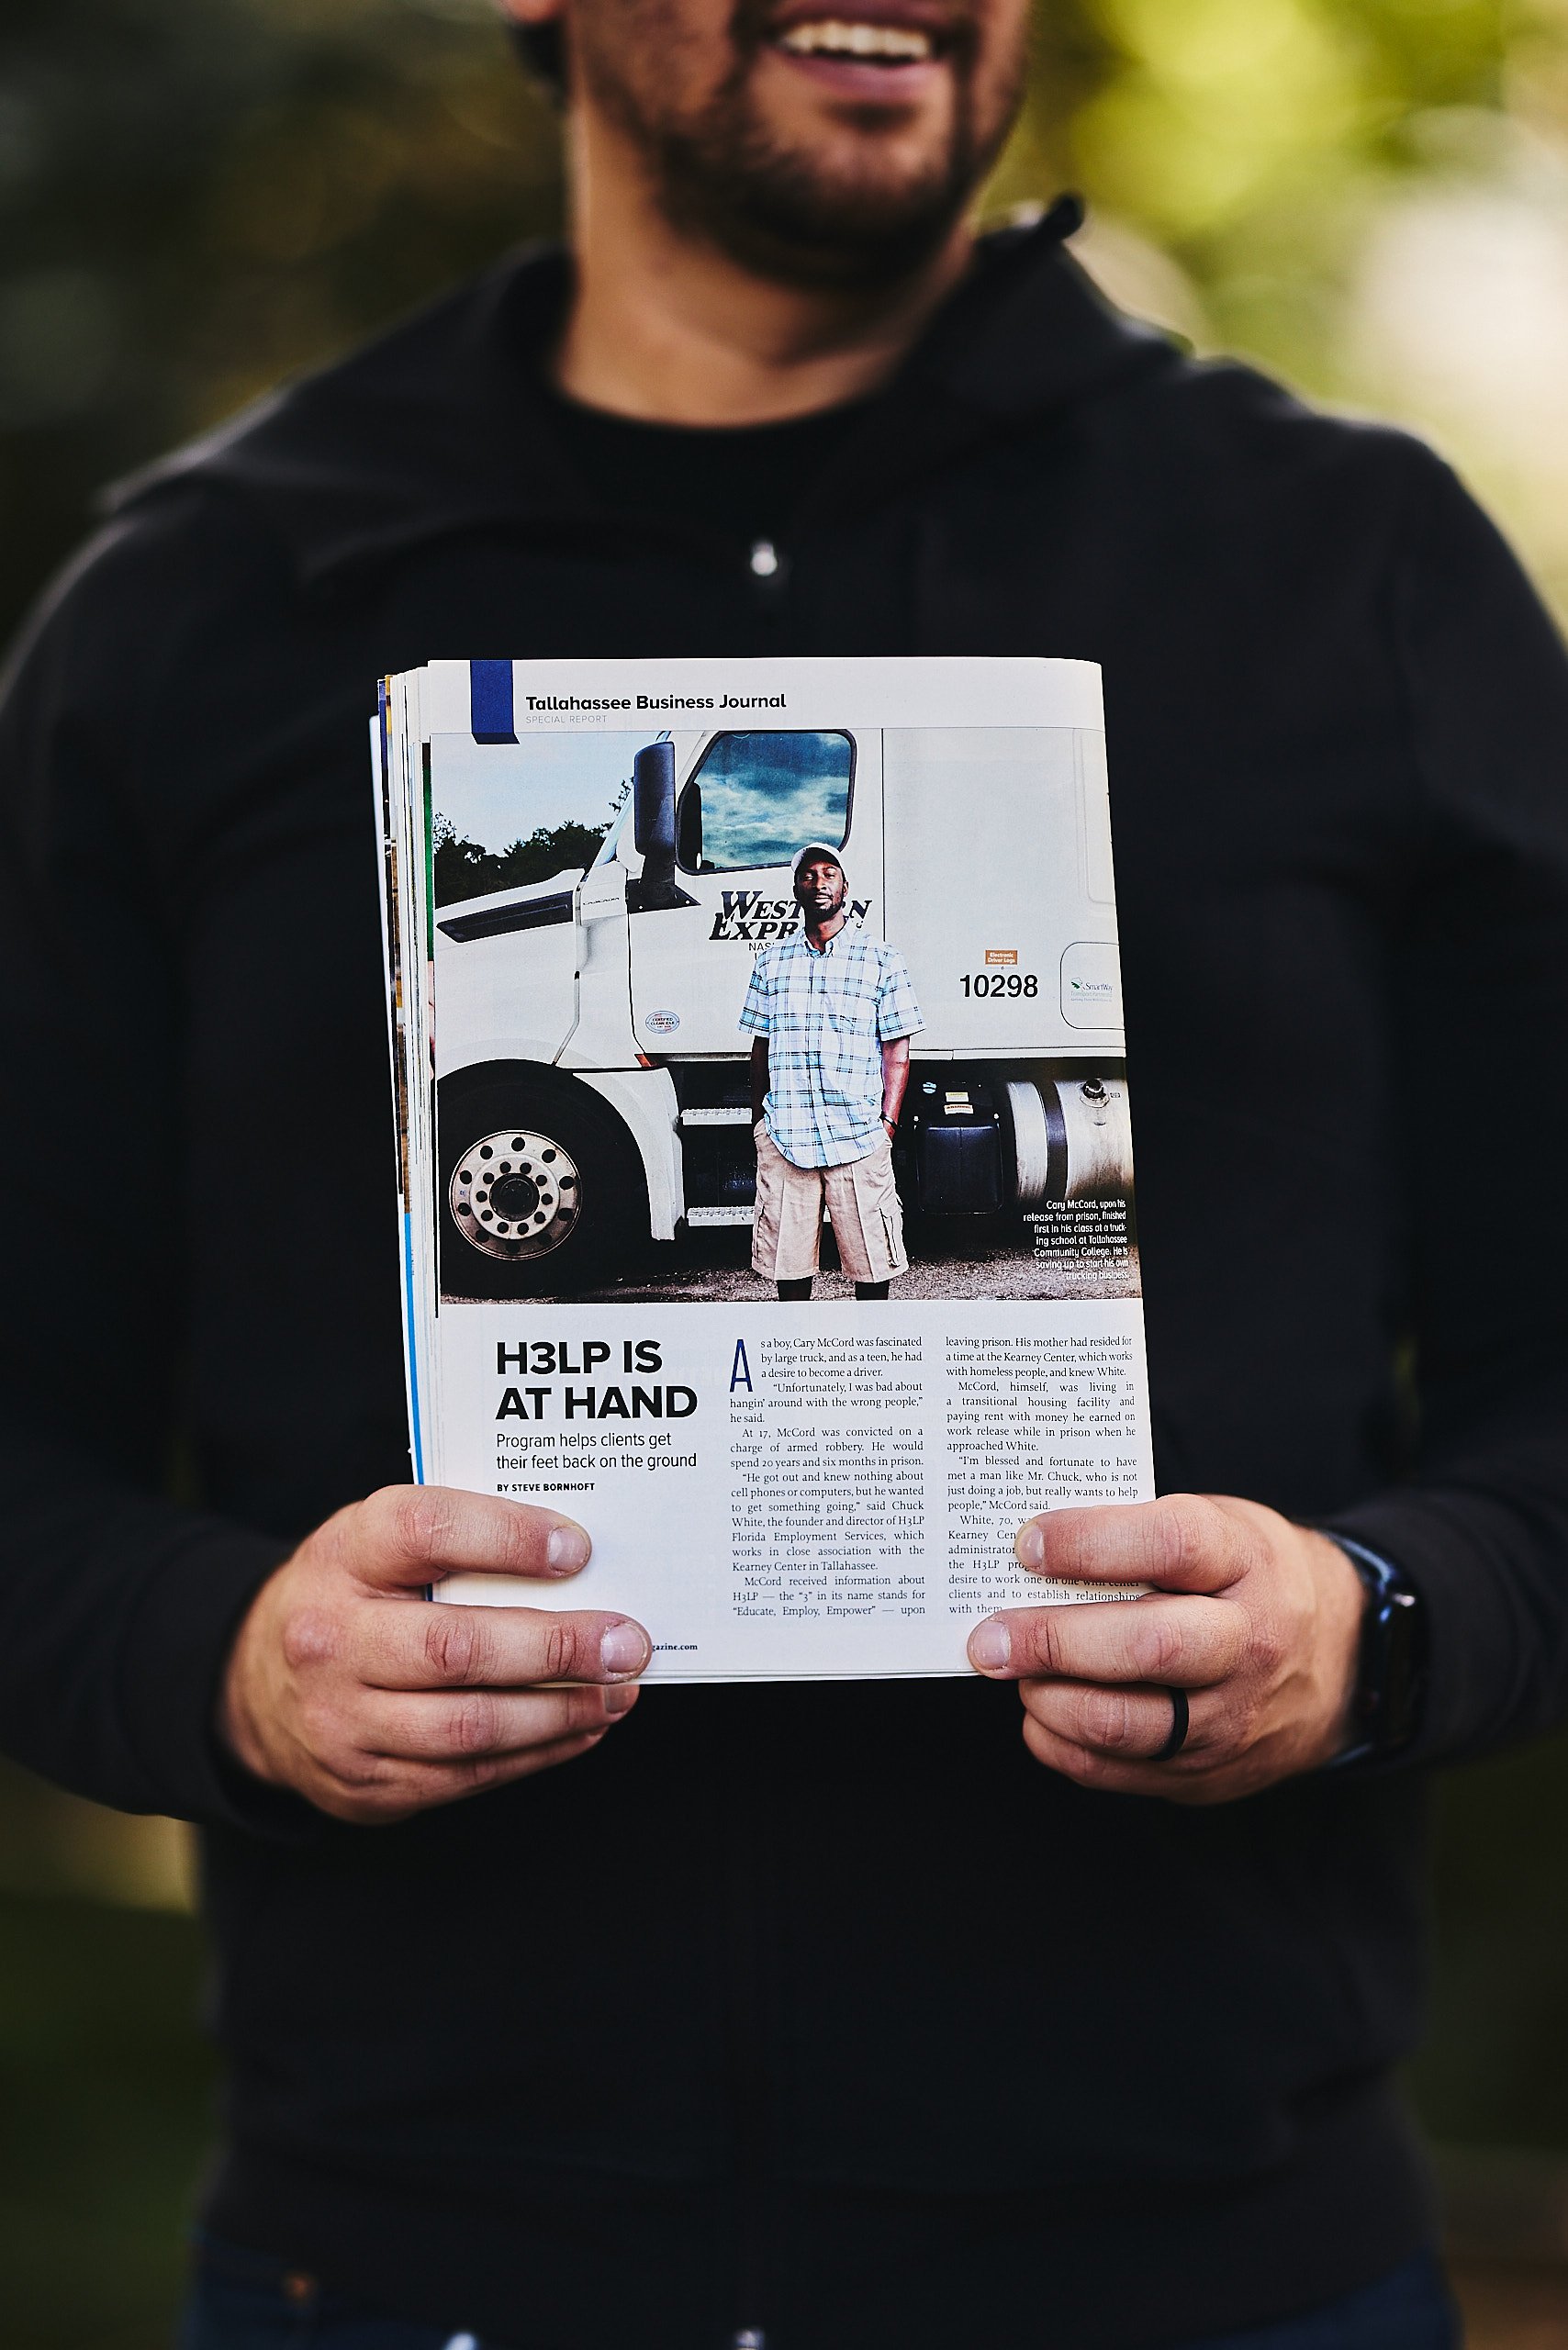 H3lp is at Hand // 850 Business Magazine